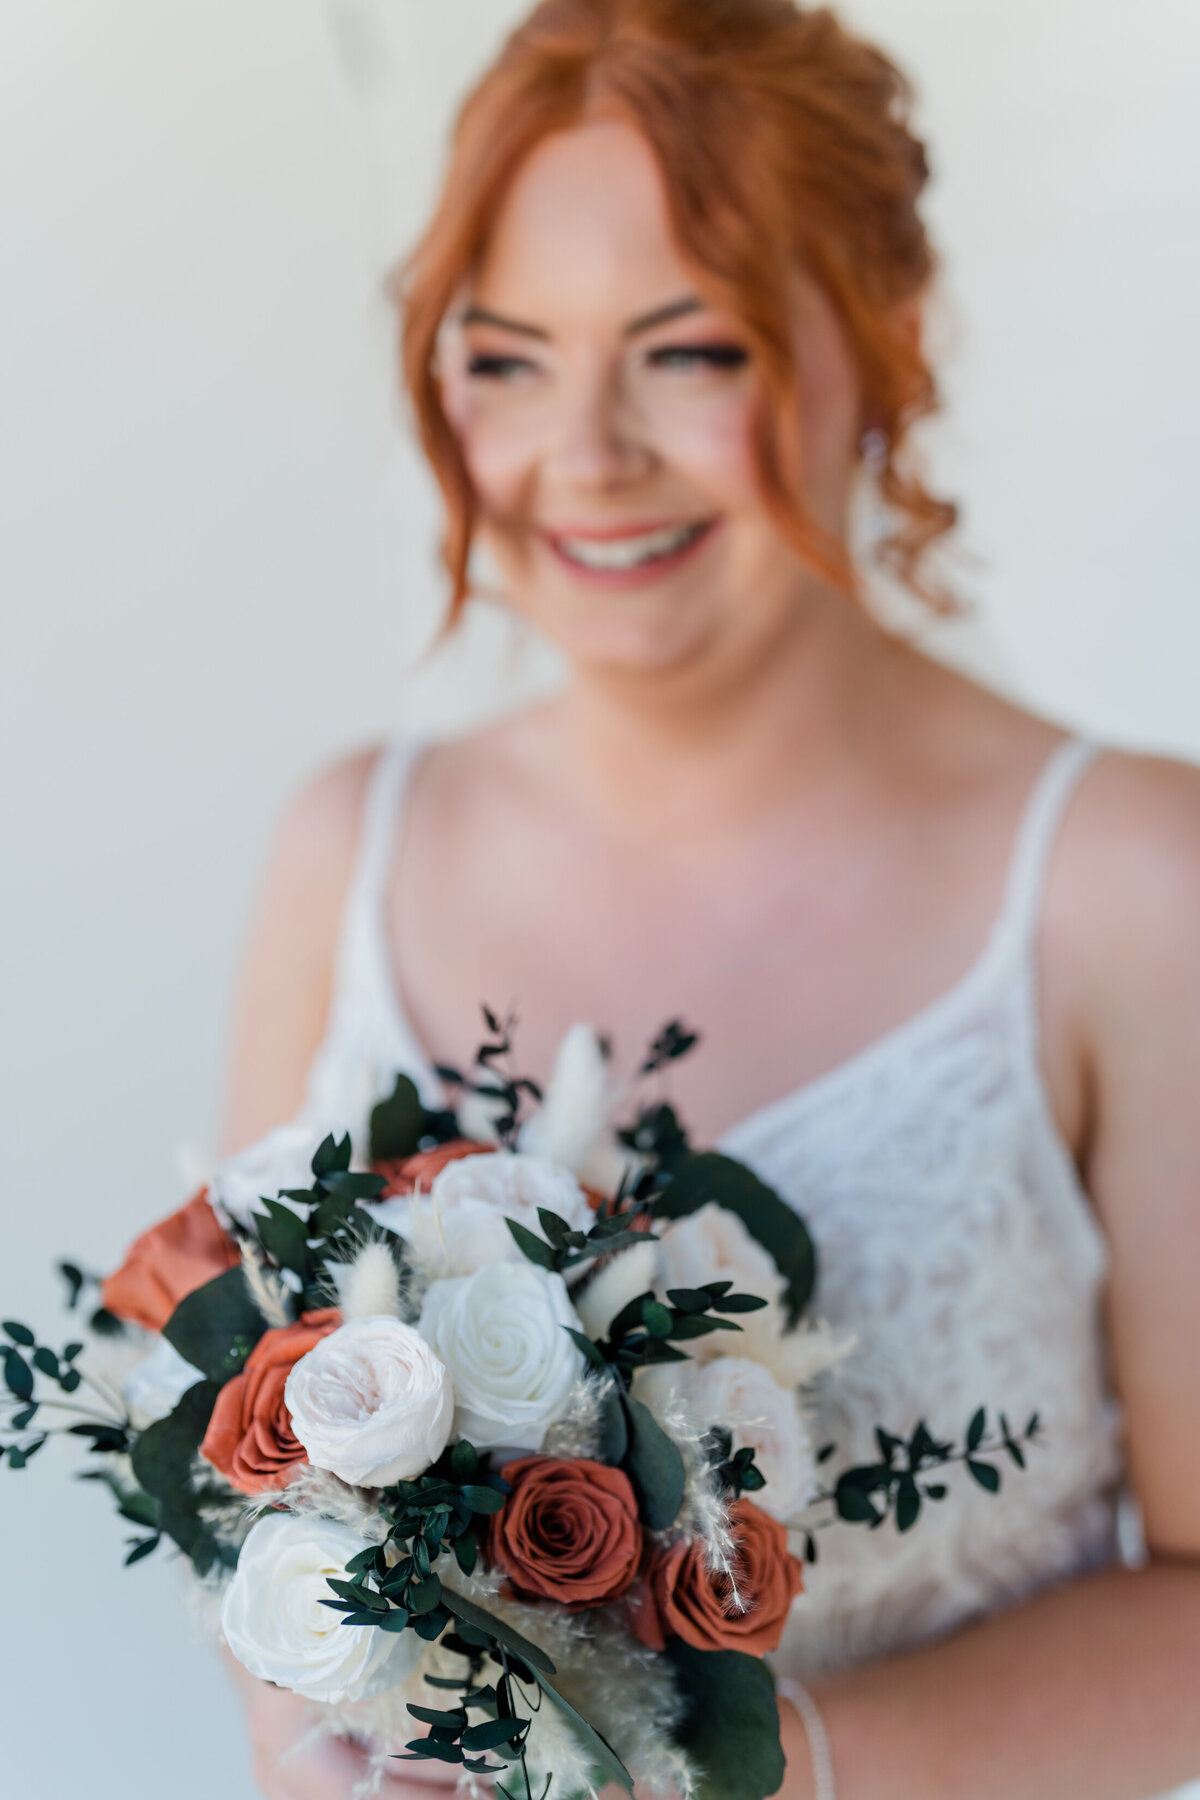 Bride laughing on her wedding day in gunning